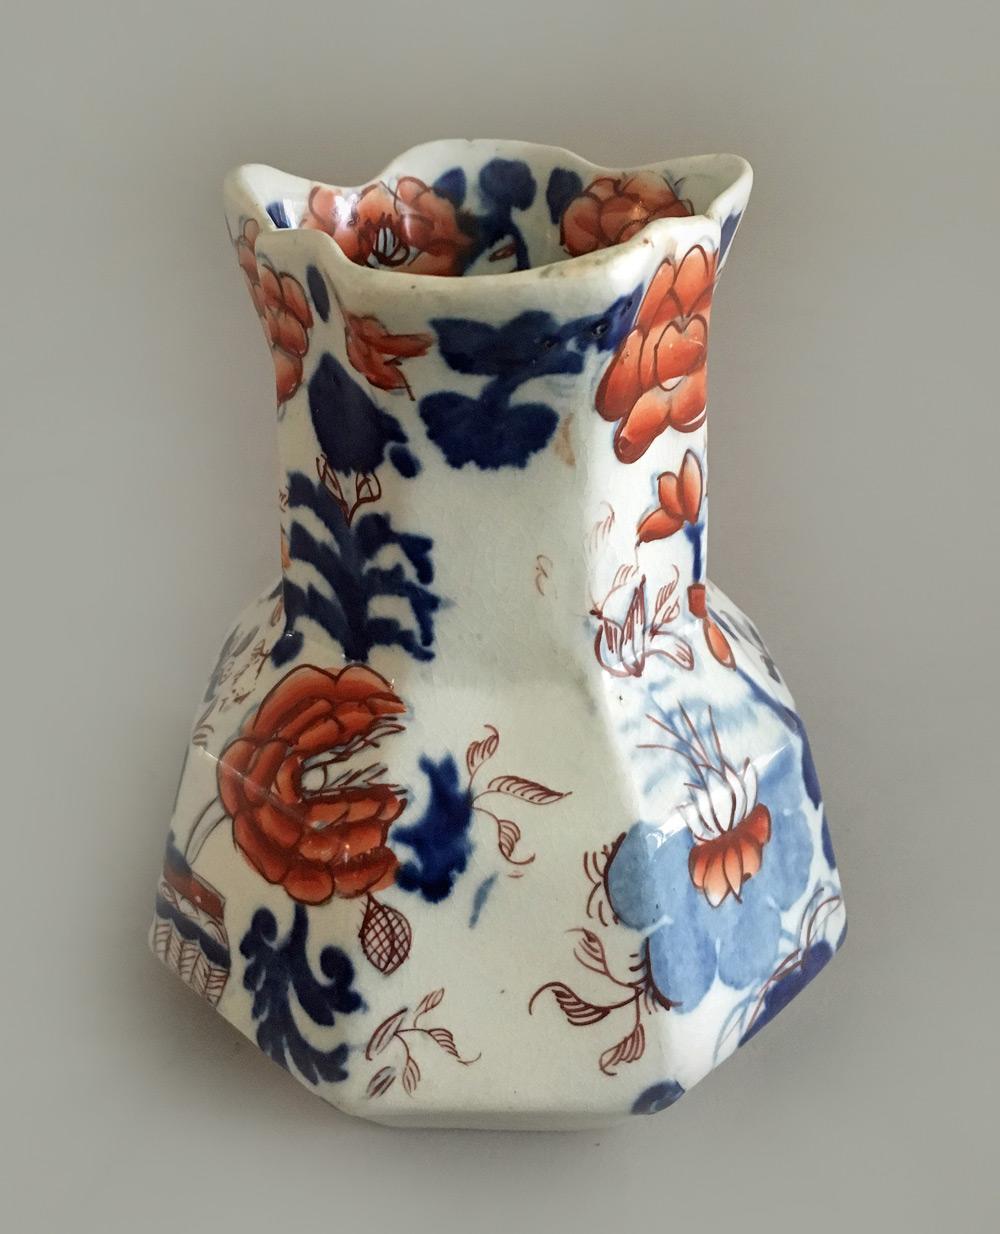 Mason’s Ironstone small jug in the hydra shape with octagonal shaped body, broad spout, sloping shoulders and bulbous body with a serpent handle. It is decorated with large flowers in cobalt blue and iron red. The bottom has the Mason’s Ironstone